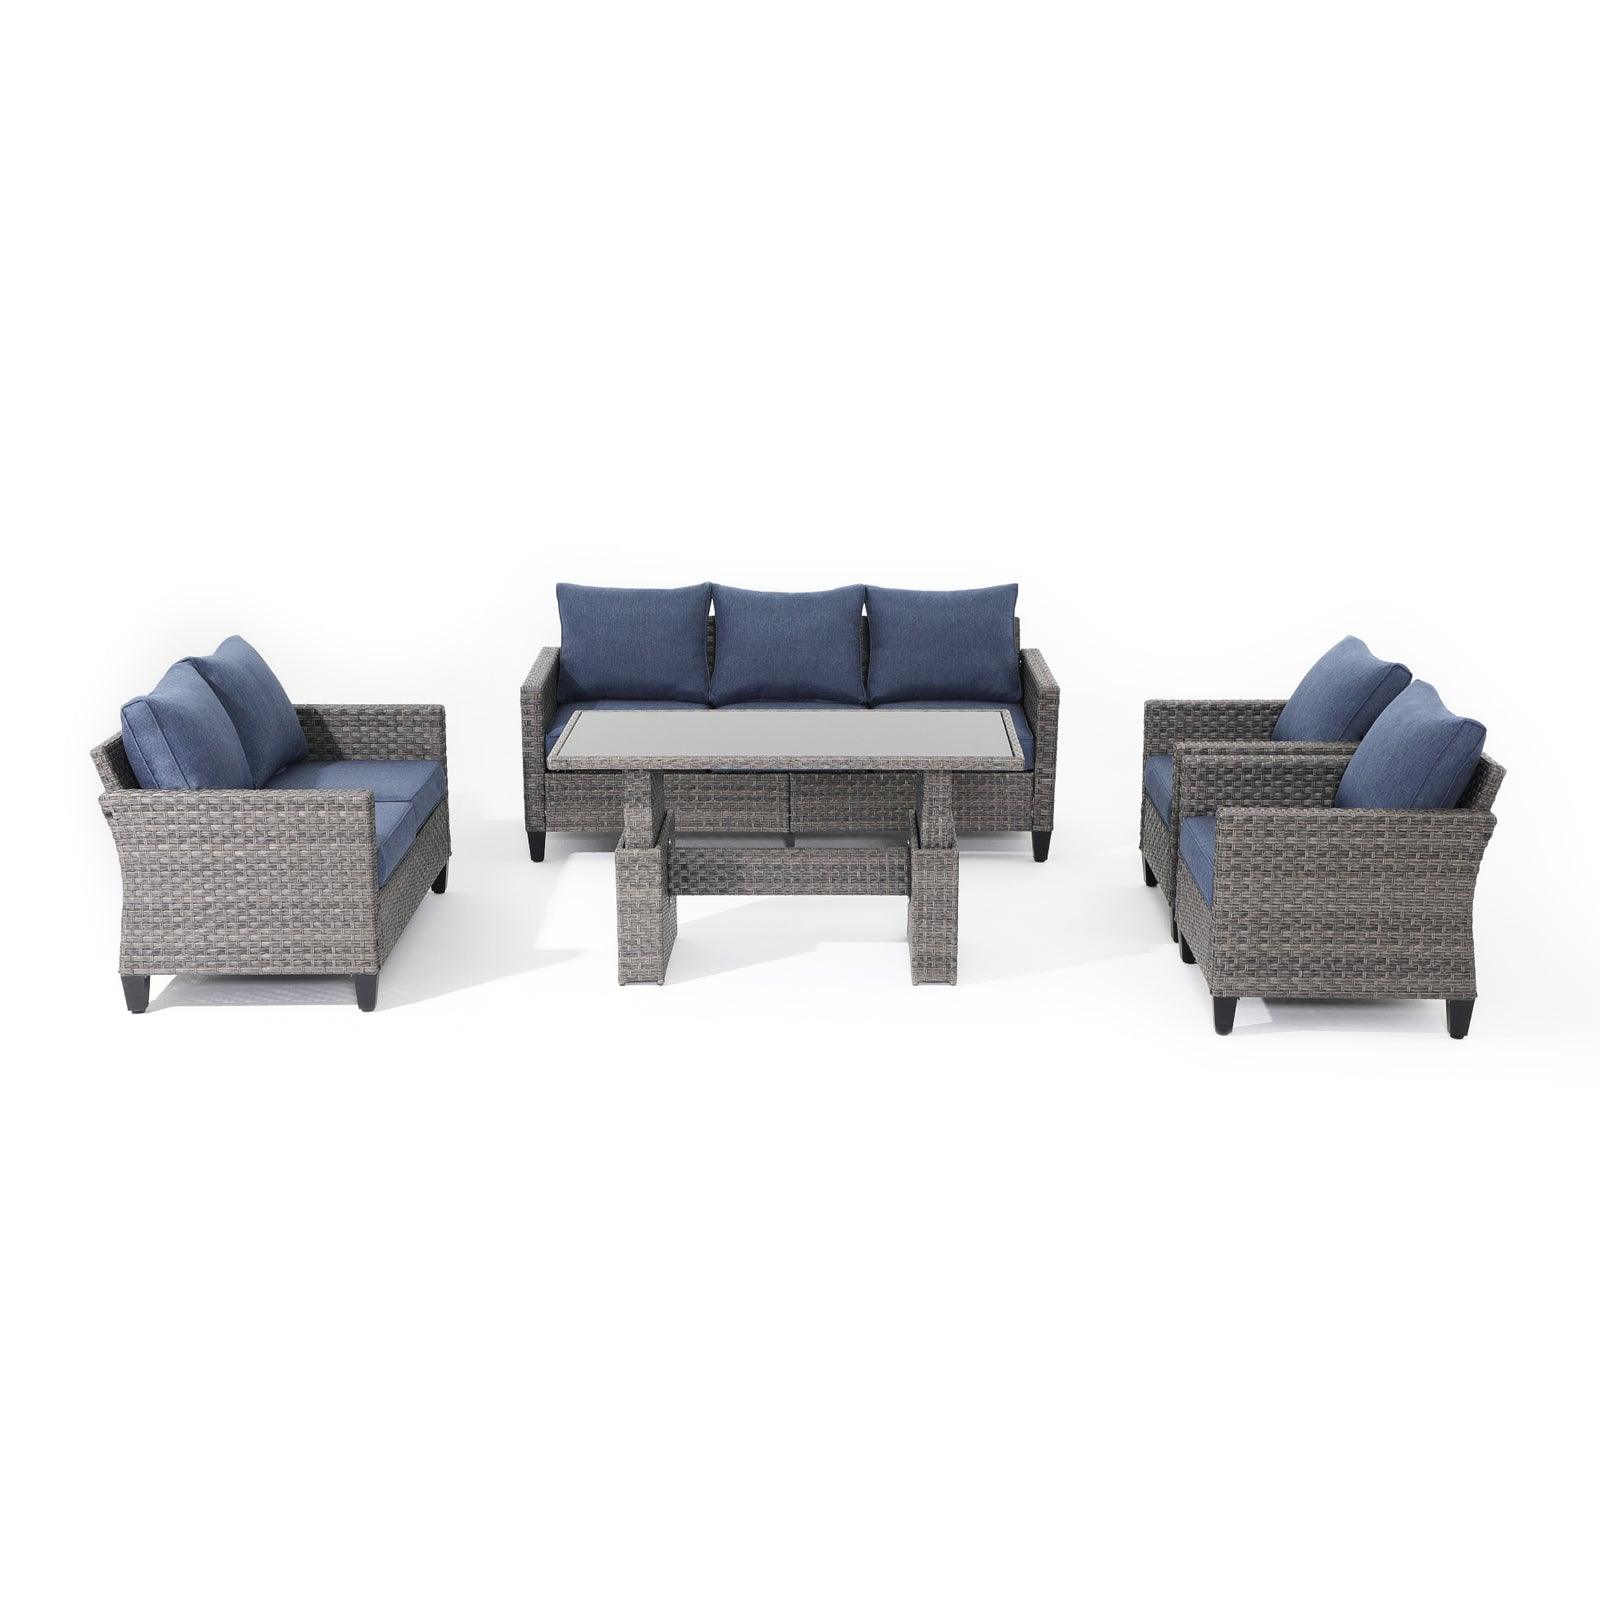 Ayia 5-Piece outdoor Sofa Set with Rattan design, Navy Blue cushions, a 3-seater sofa, 2 arm chairs , 1 loveseat, 1 multifunctional lift-top dining table - Jardina Furniture #Piece_5-pc#Color_Navy Blue#Style_with Table